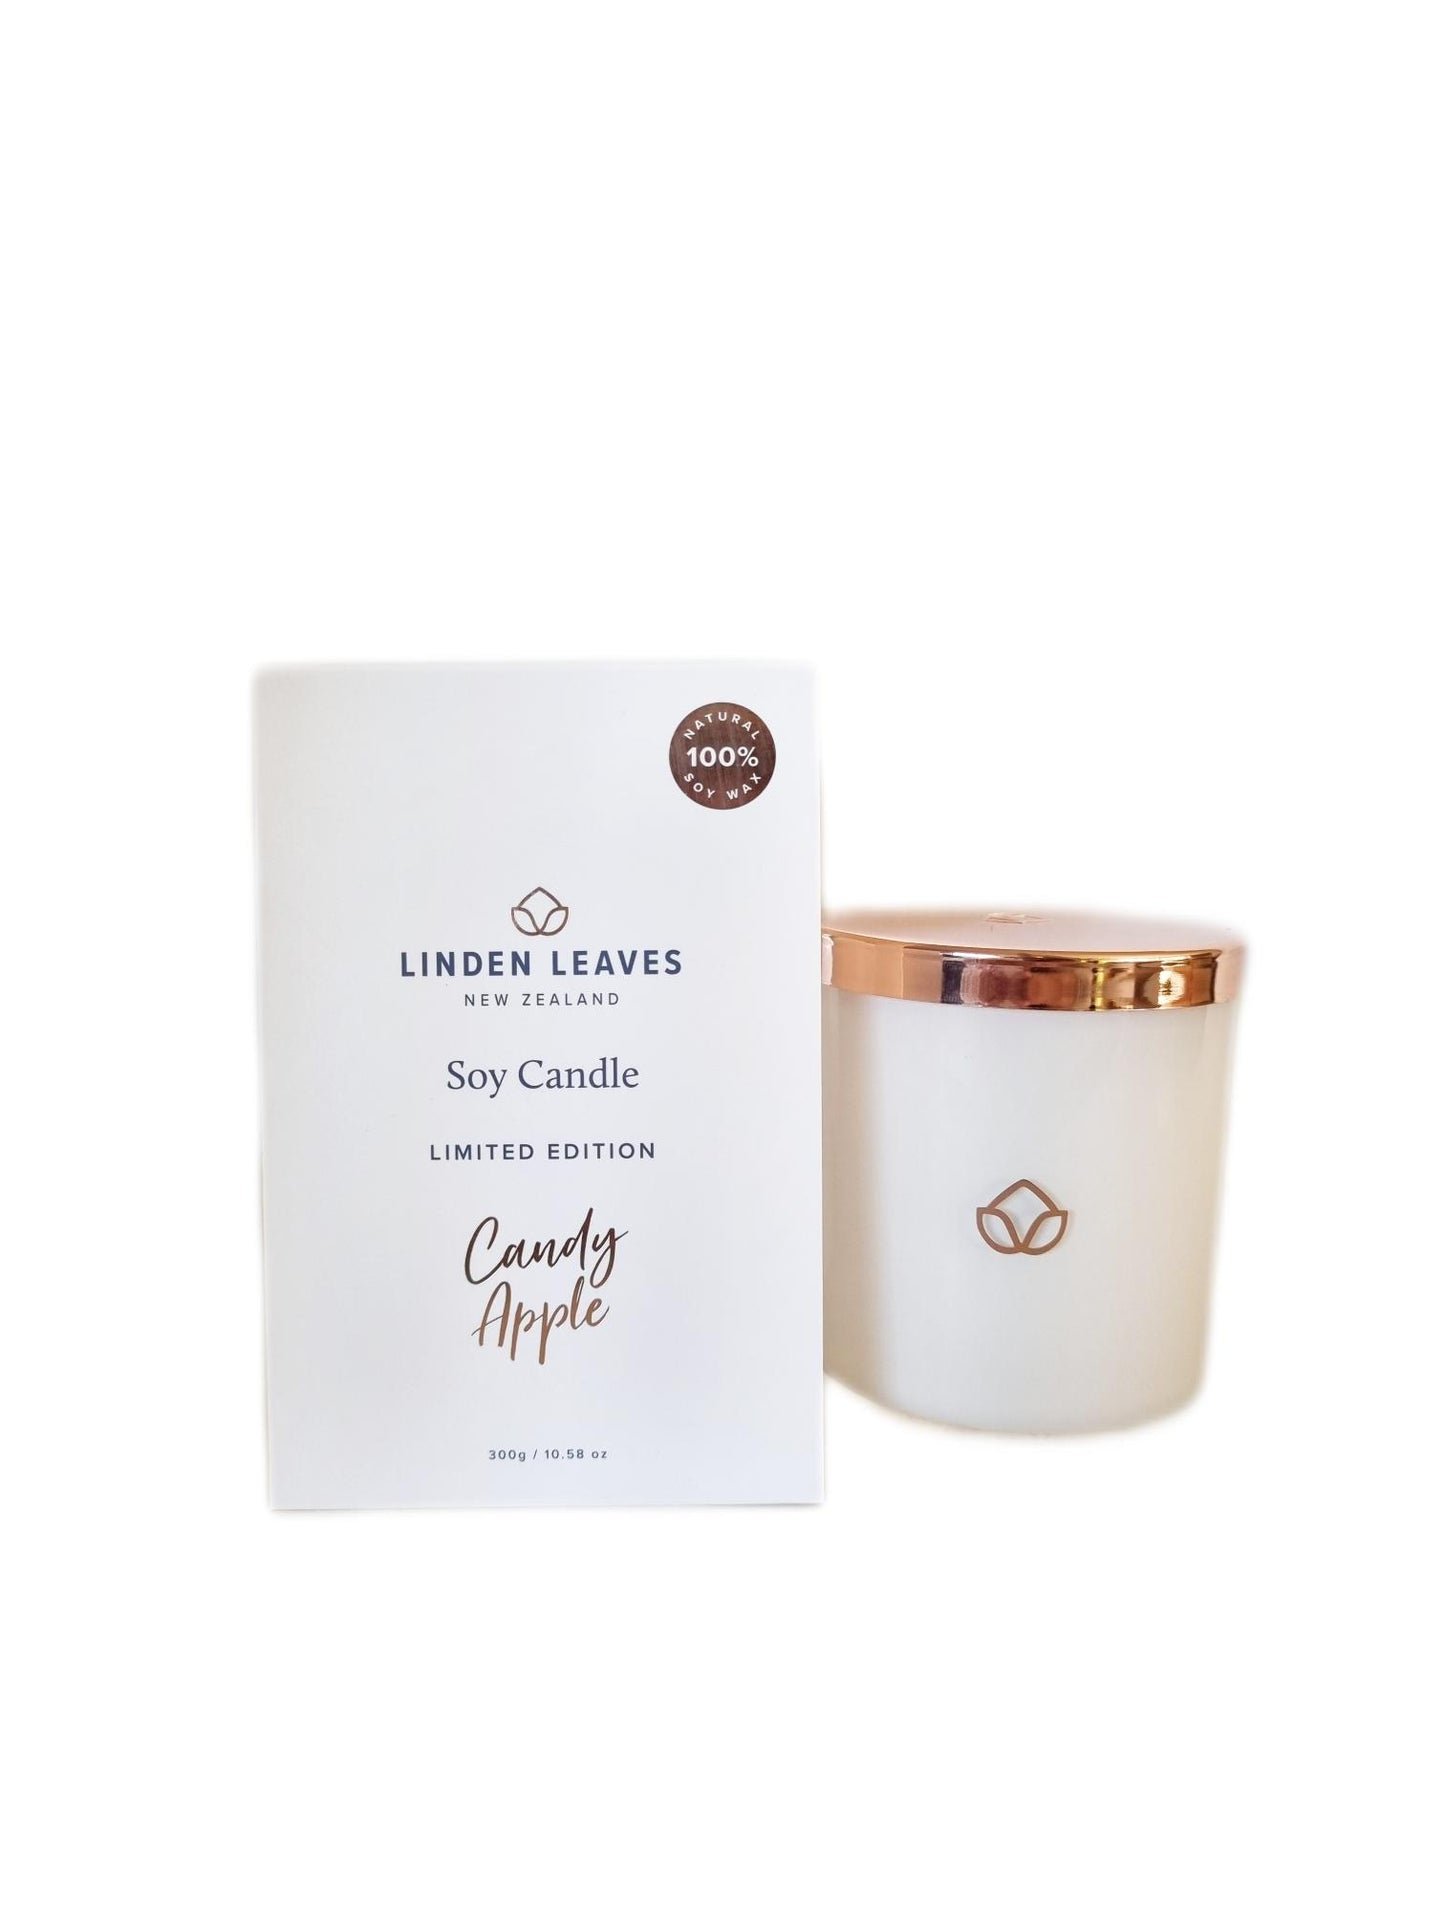 Linden Leaves Candy Apple Candle